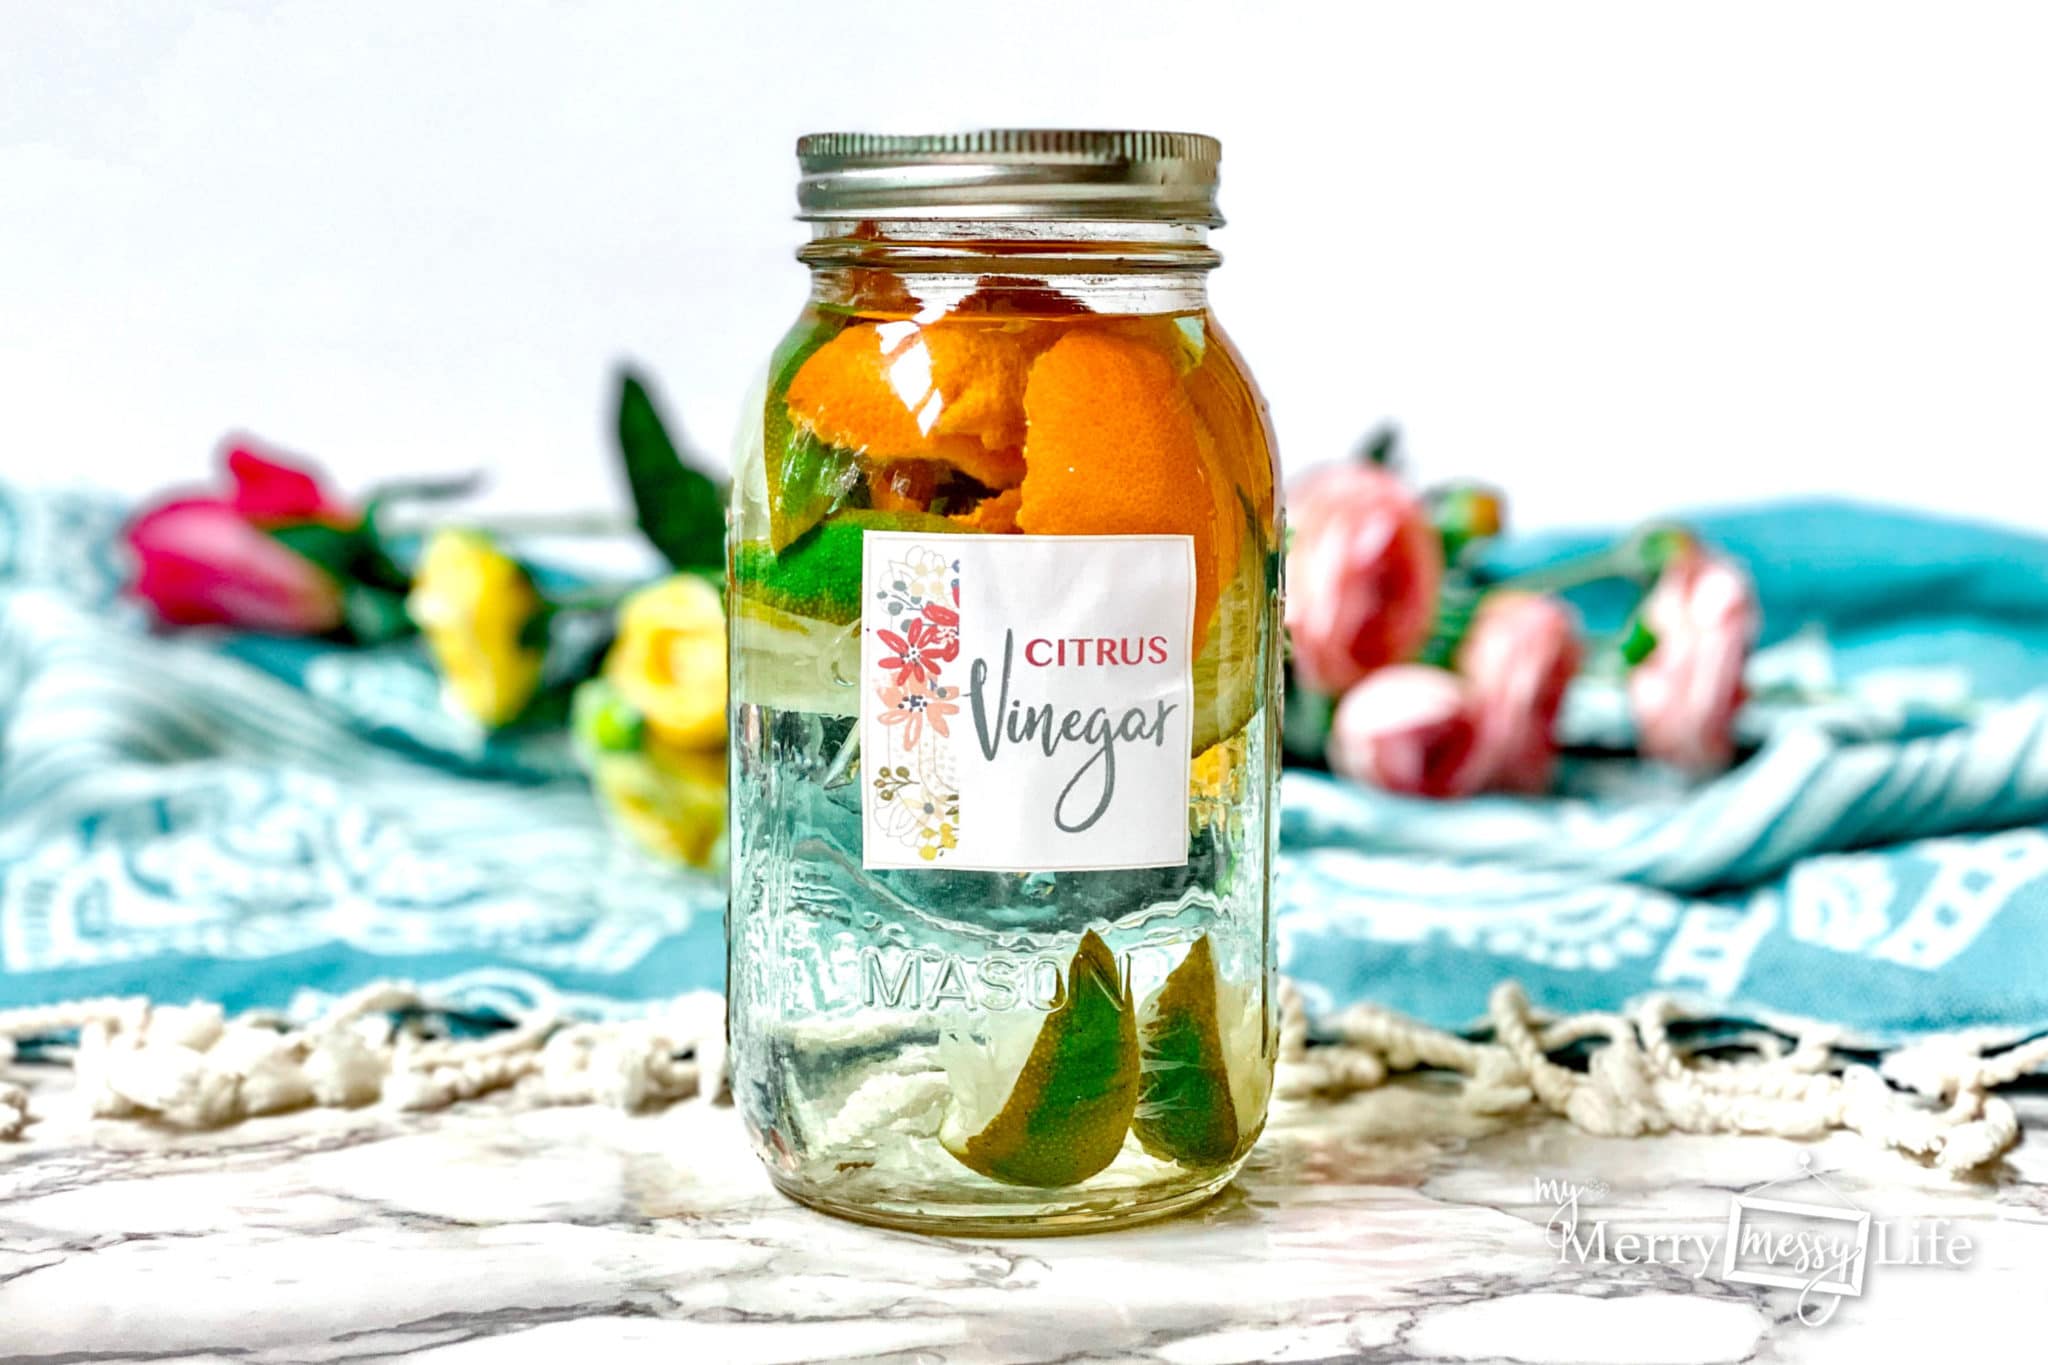 DIY Natural Citrus Infused Vinegar - use the leftover citrus peels as a garbage disposal cleaner!